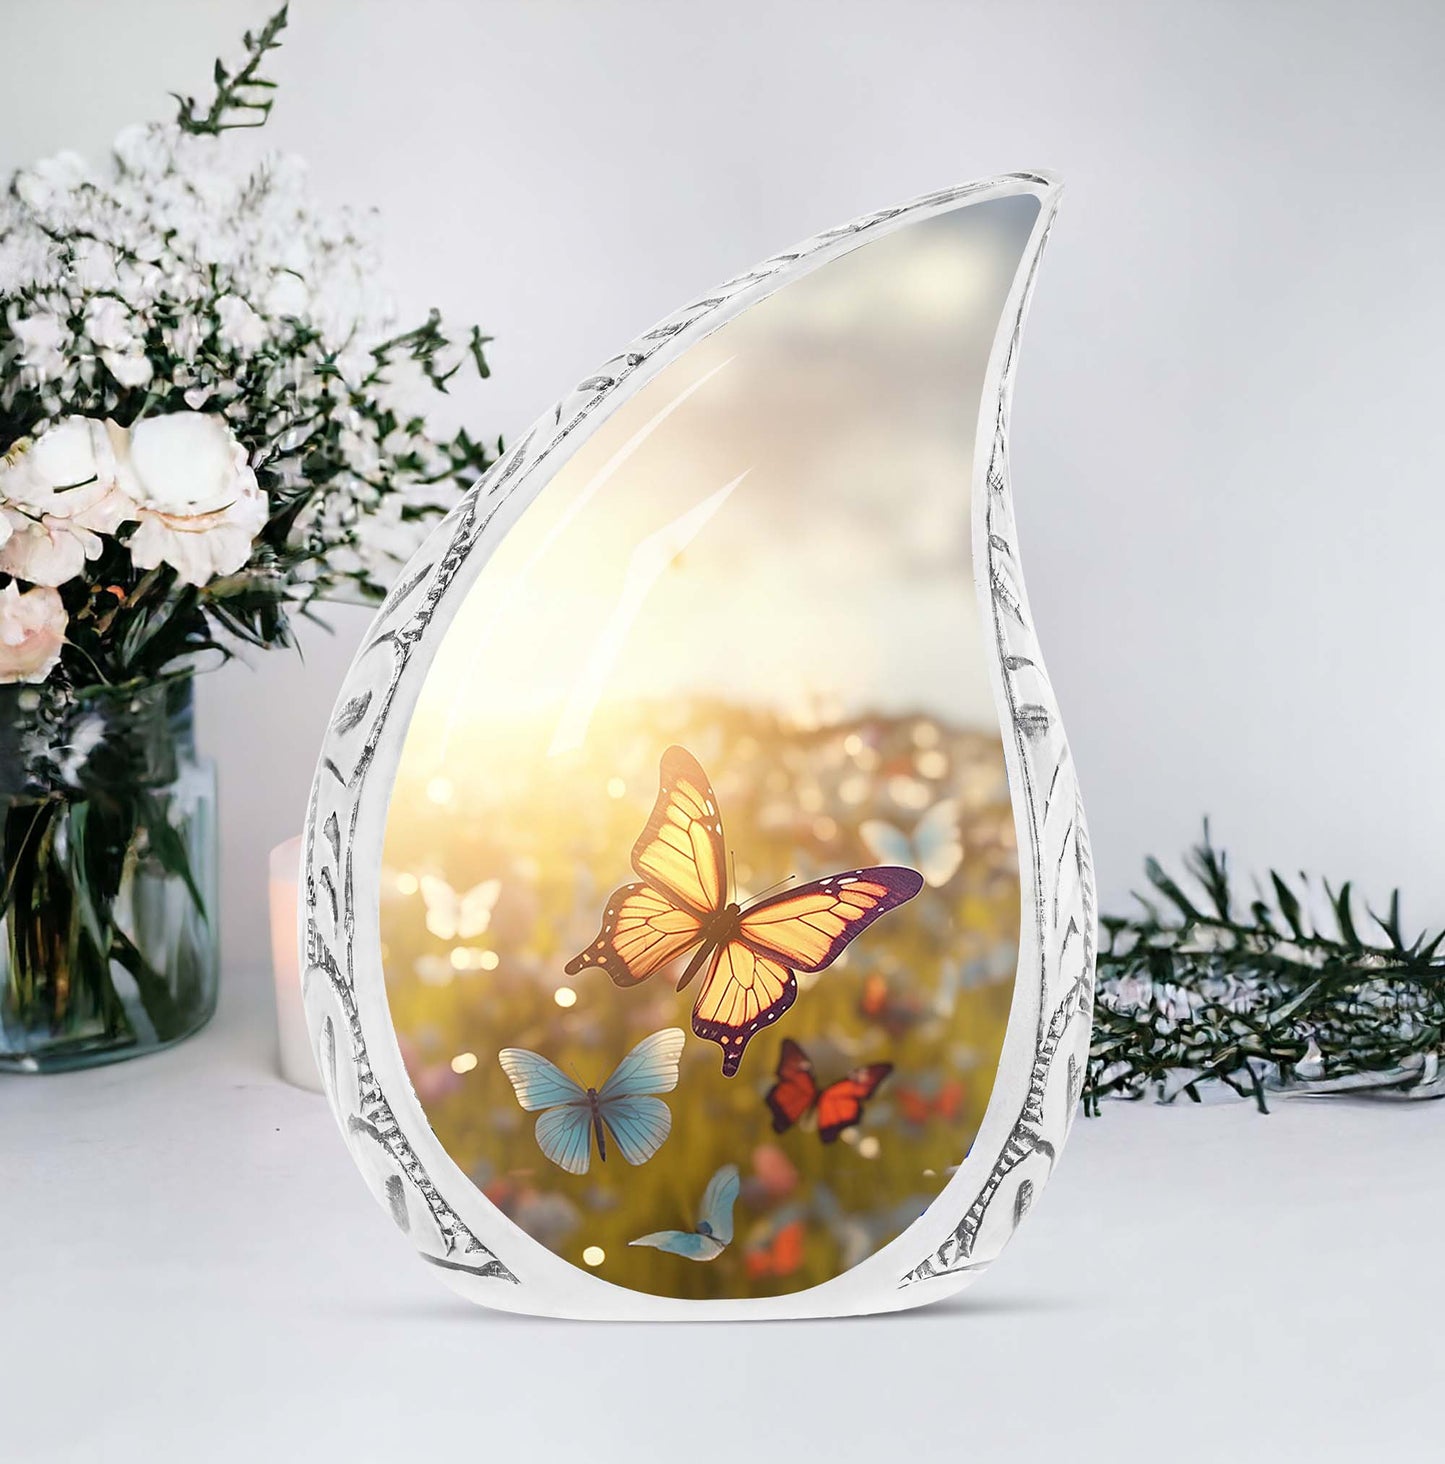 Large urn ornately designed with butterflies on a sunset meadow, ideal for human ashes adult female burial or cremation